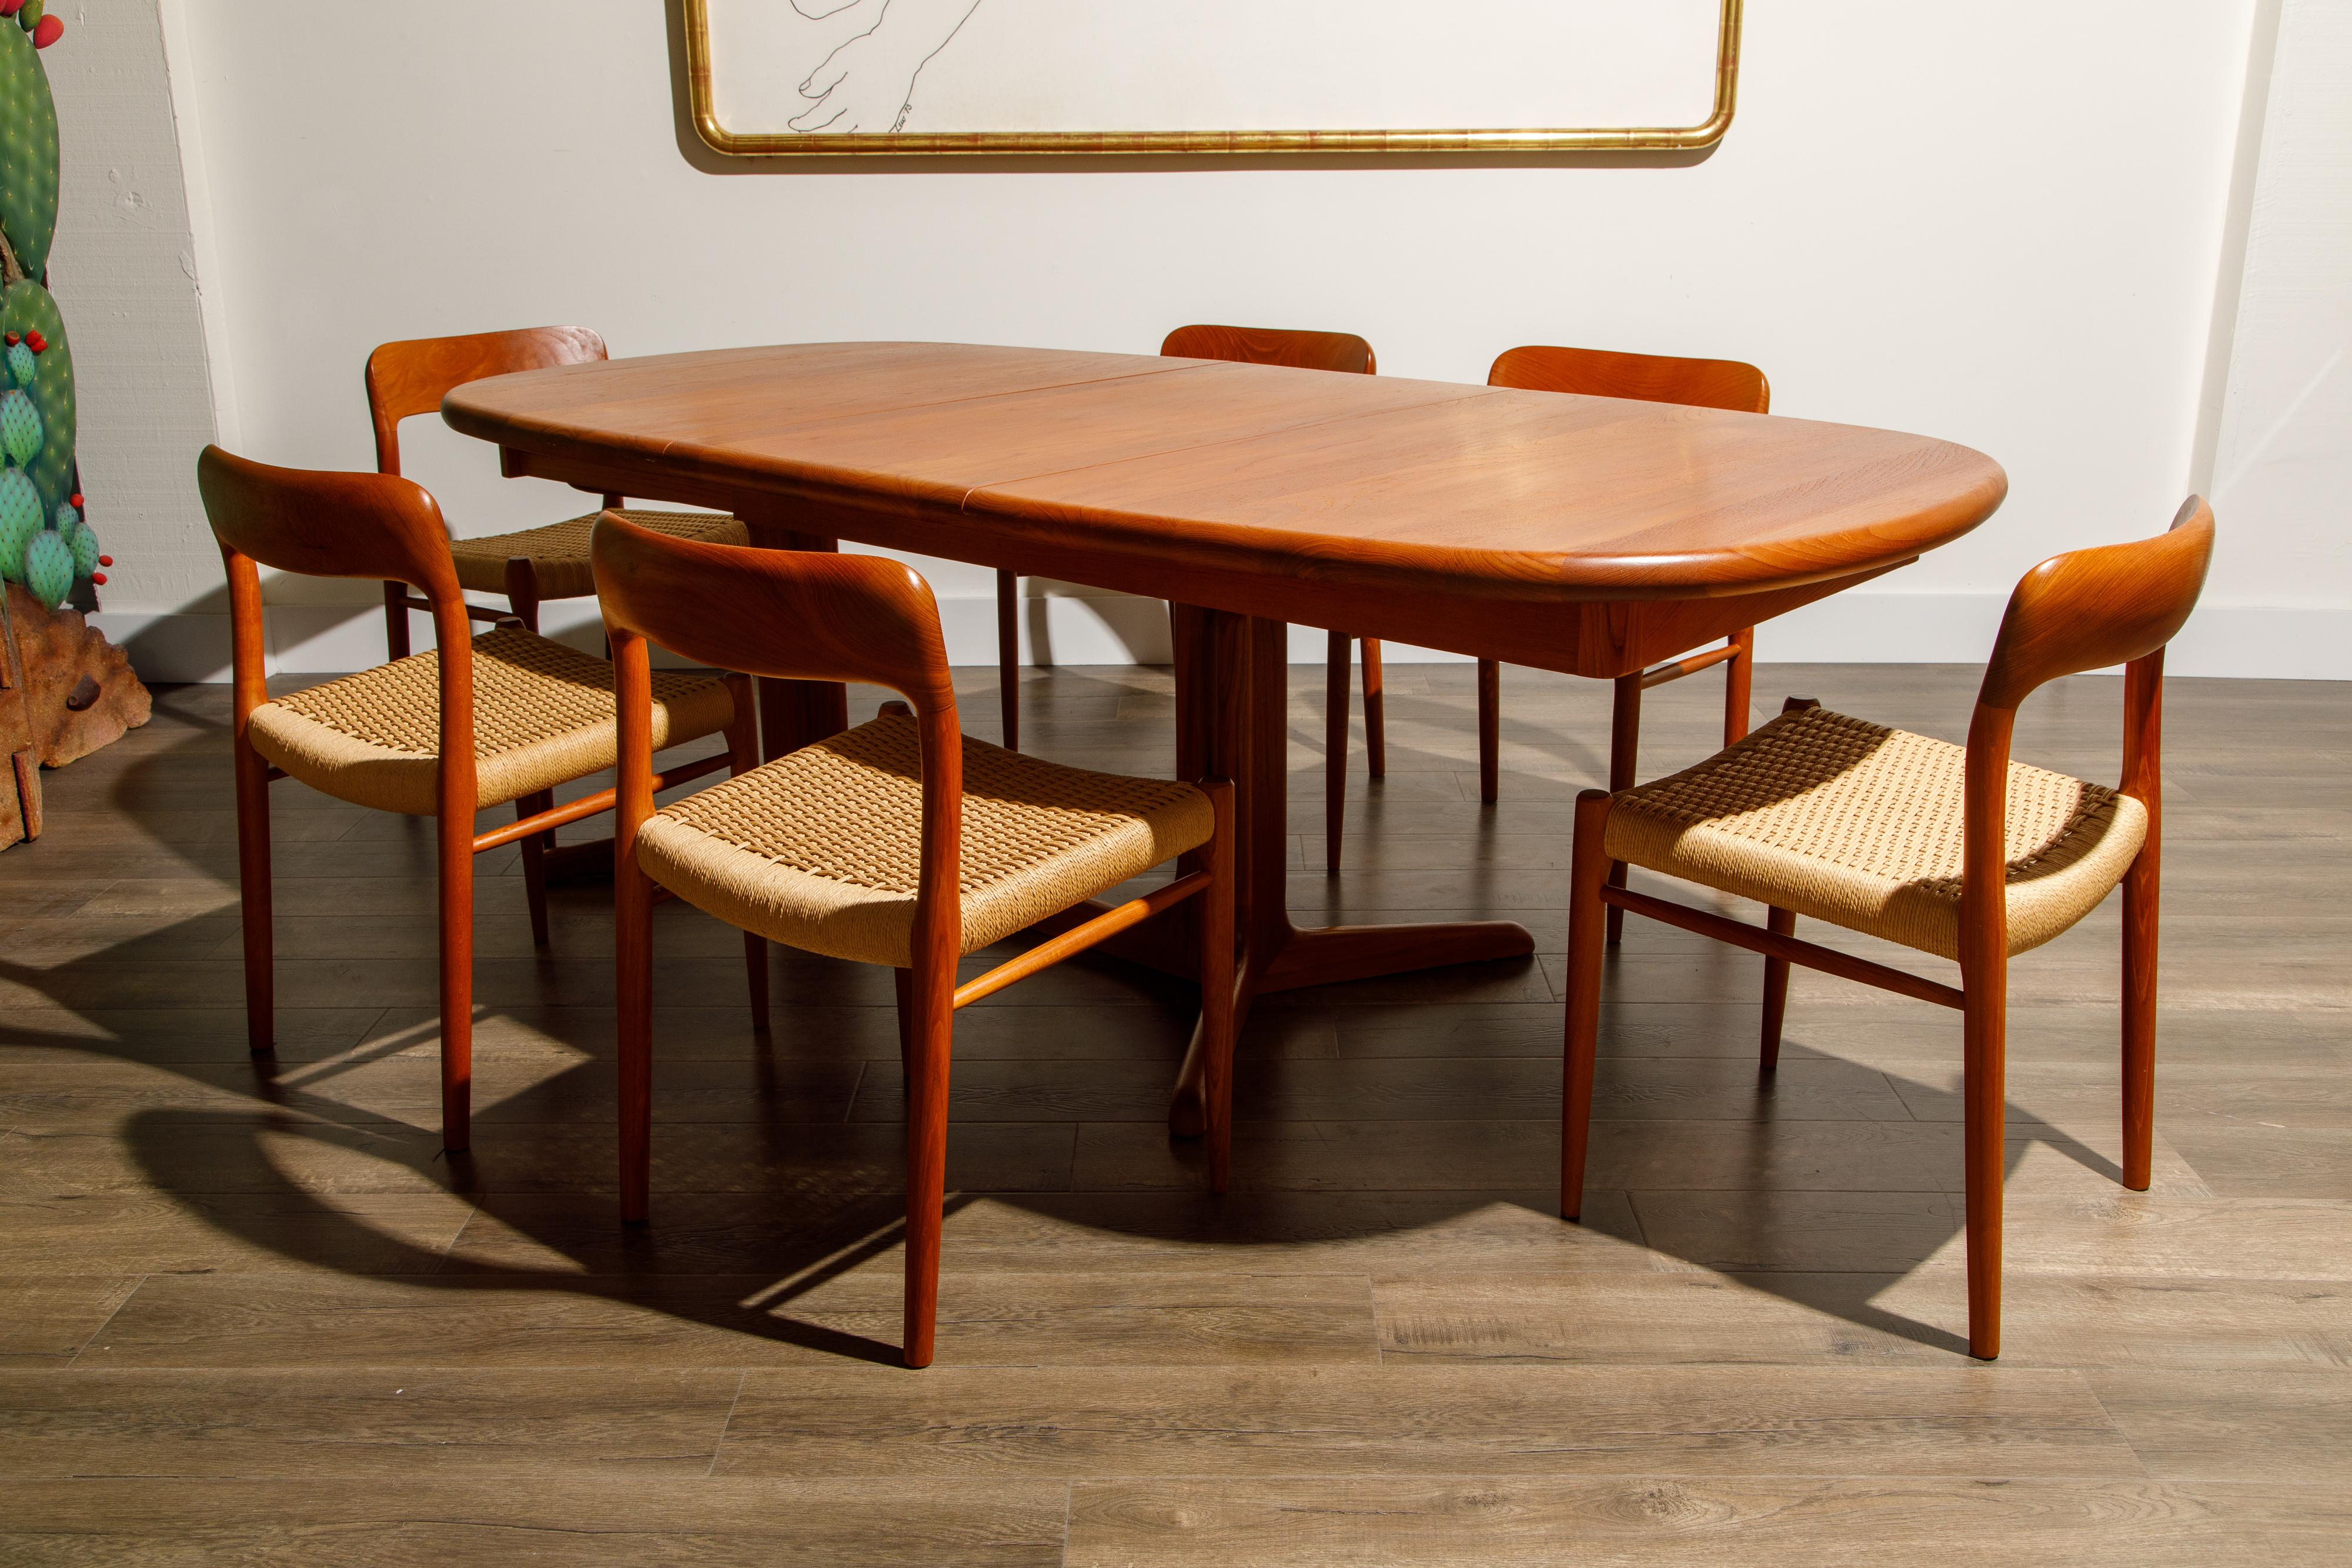 This incredible teak dining set by Niels Otto Møller for J.L. Møllers Møbelfabrik includes six (6) Model 75 papercord dining chairs and one (1) heavy solid teak expandable dining table which includes two leaves and can seat up to 10 people when